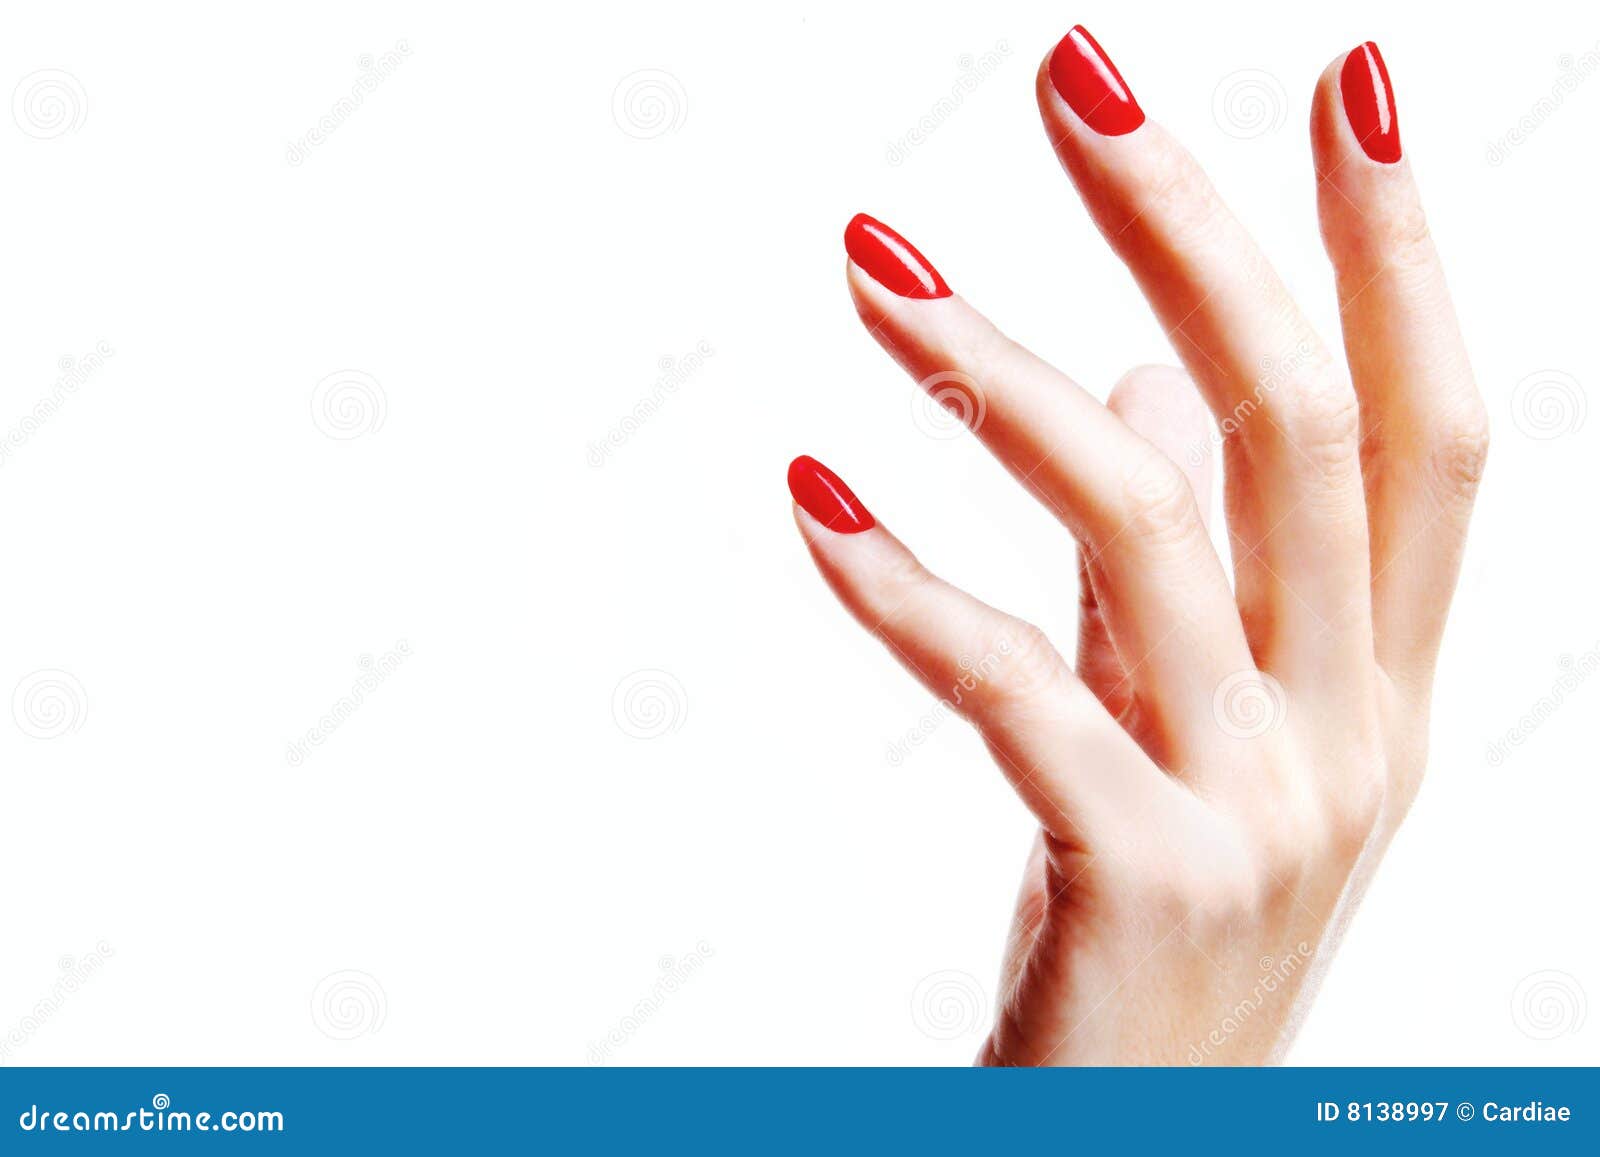 hand with red fingernails